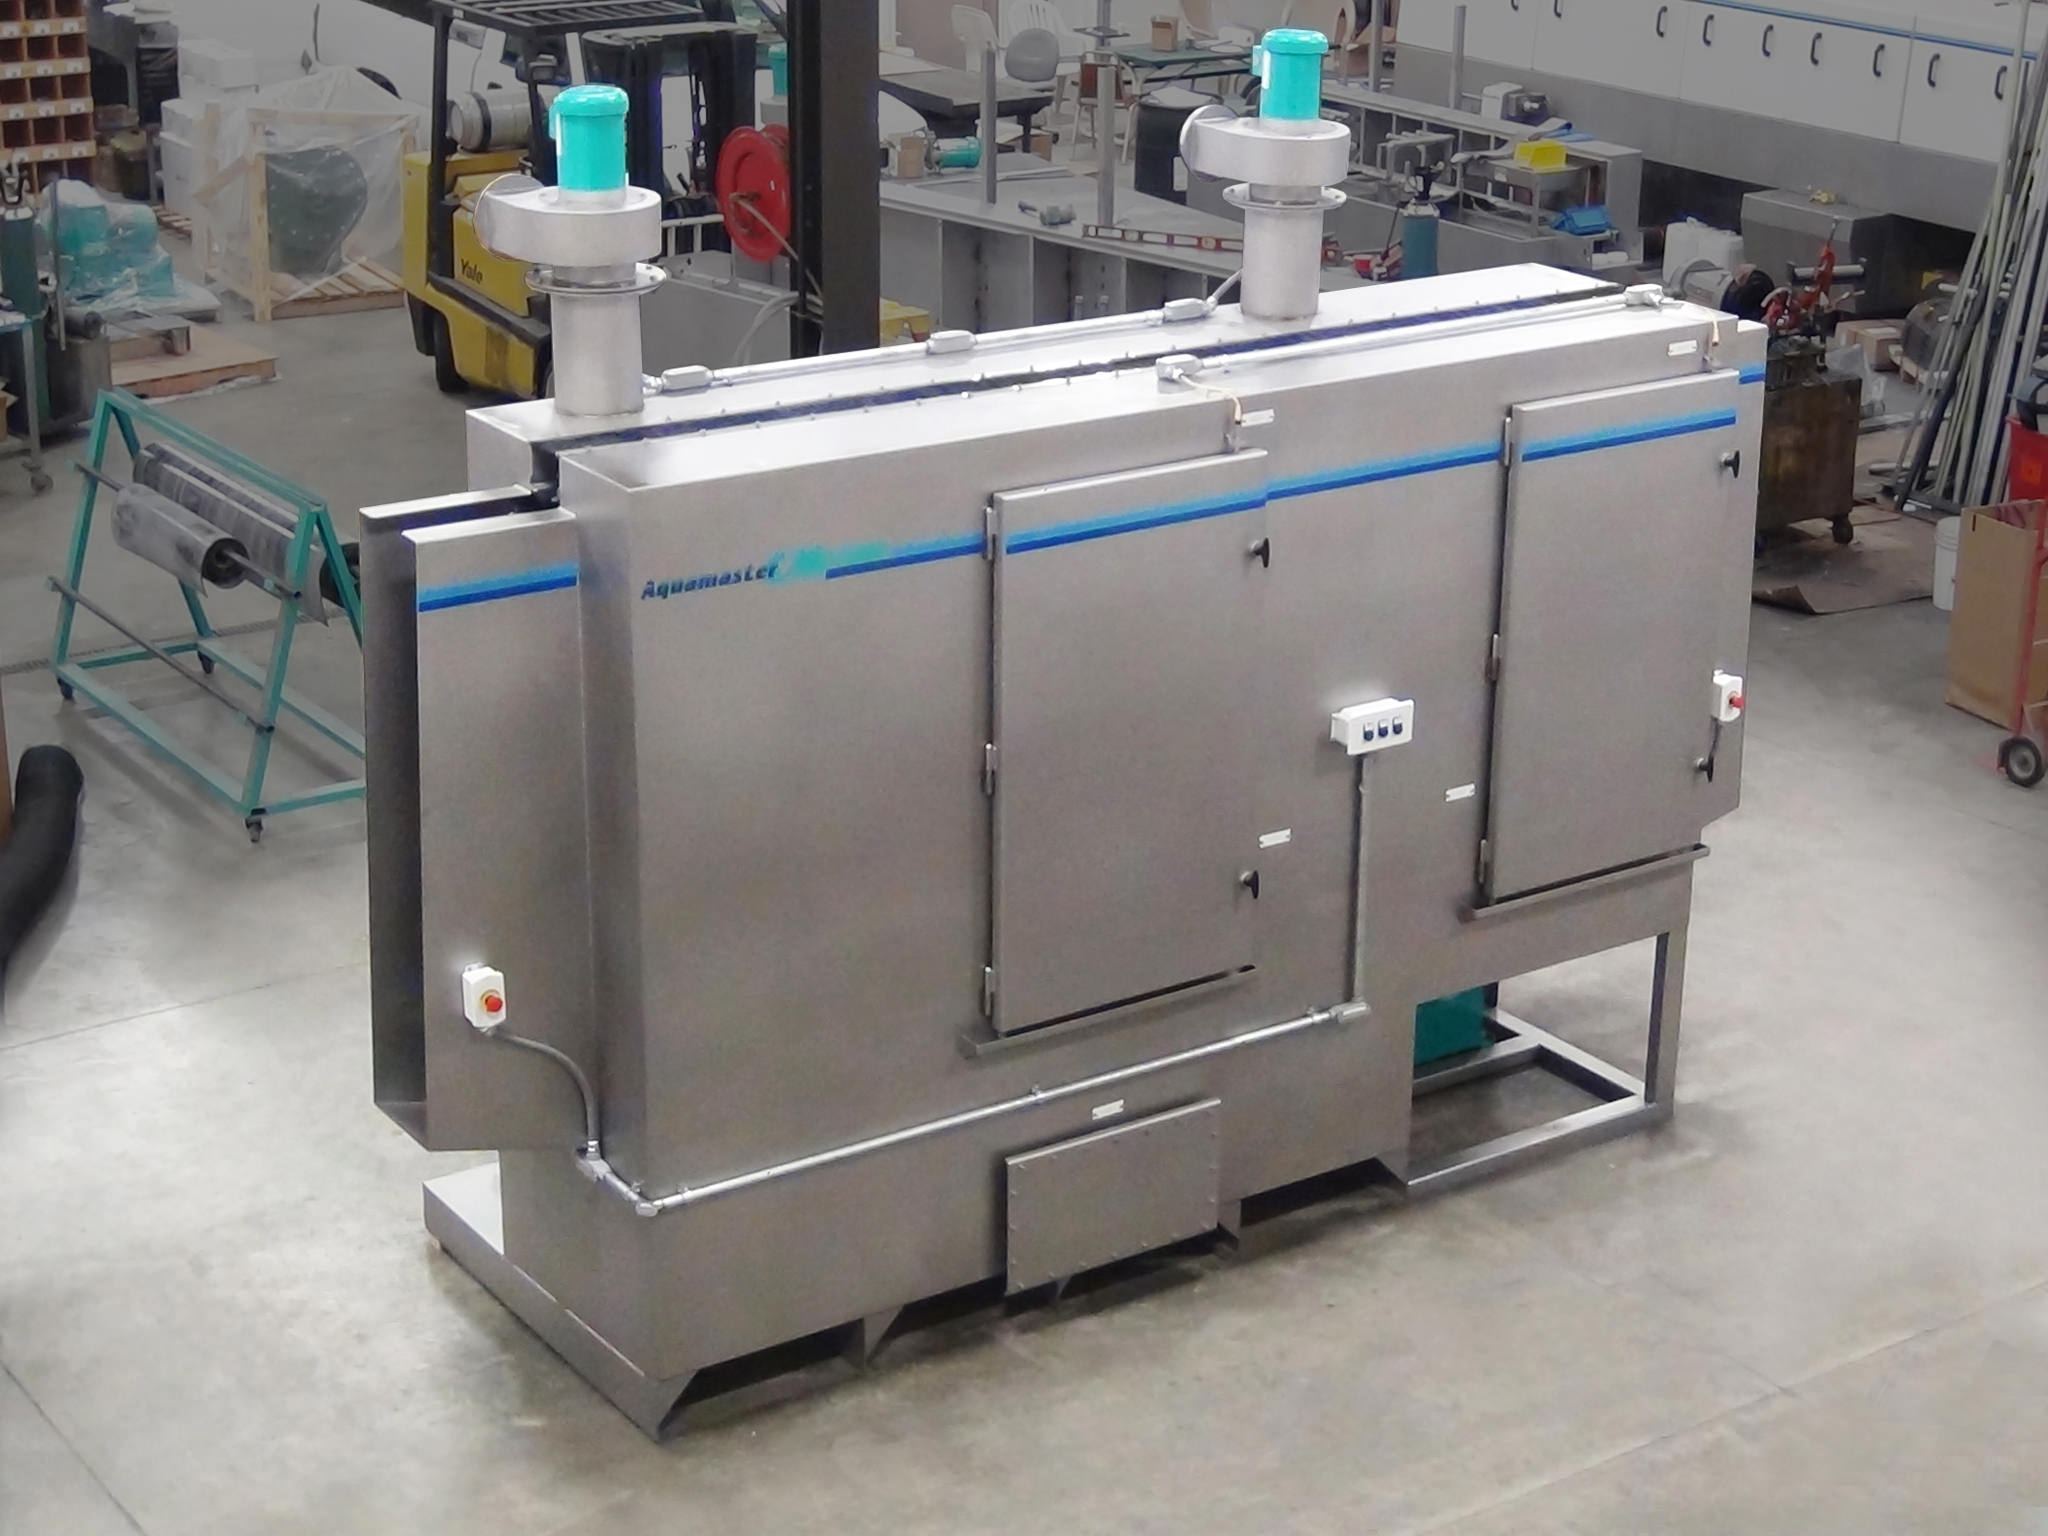 Aquamaster CM-1200E conveyorized monorail cleaning system